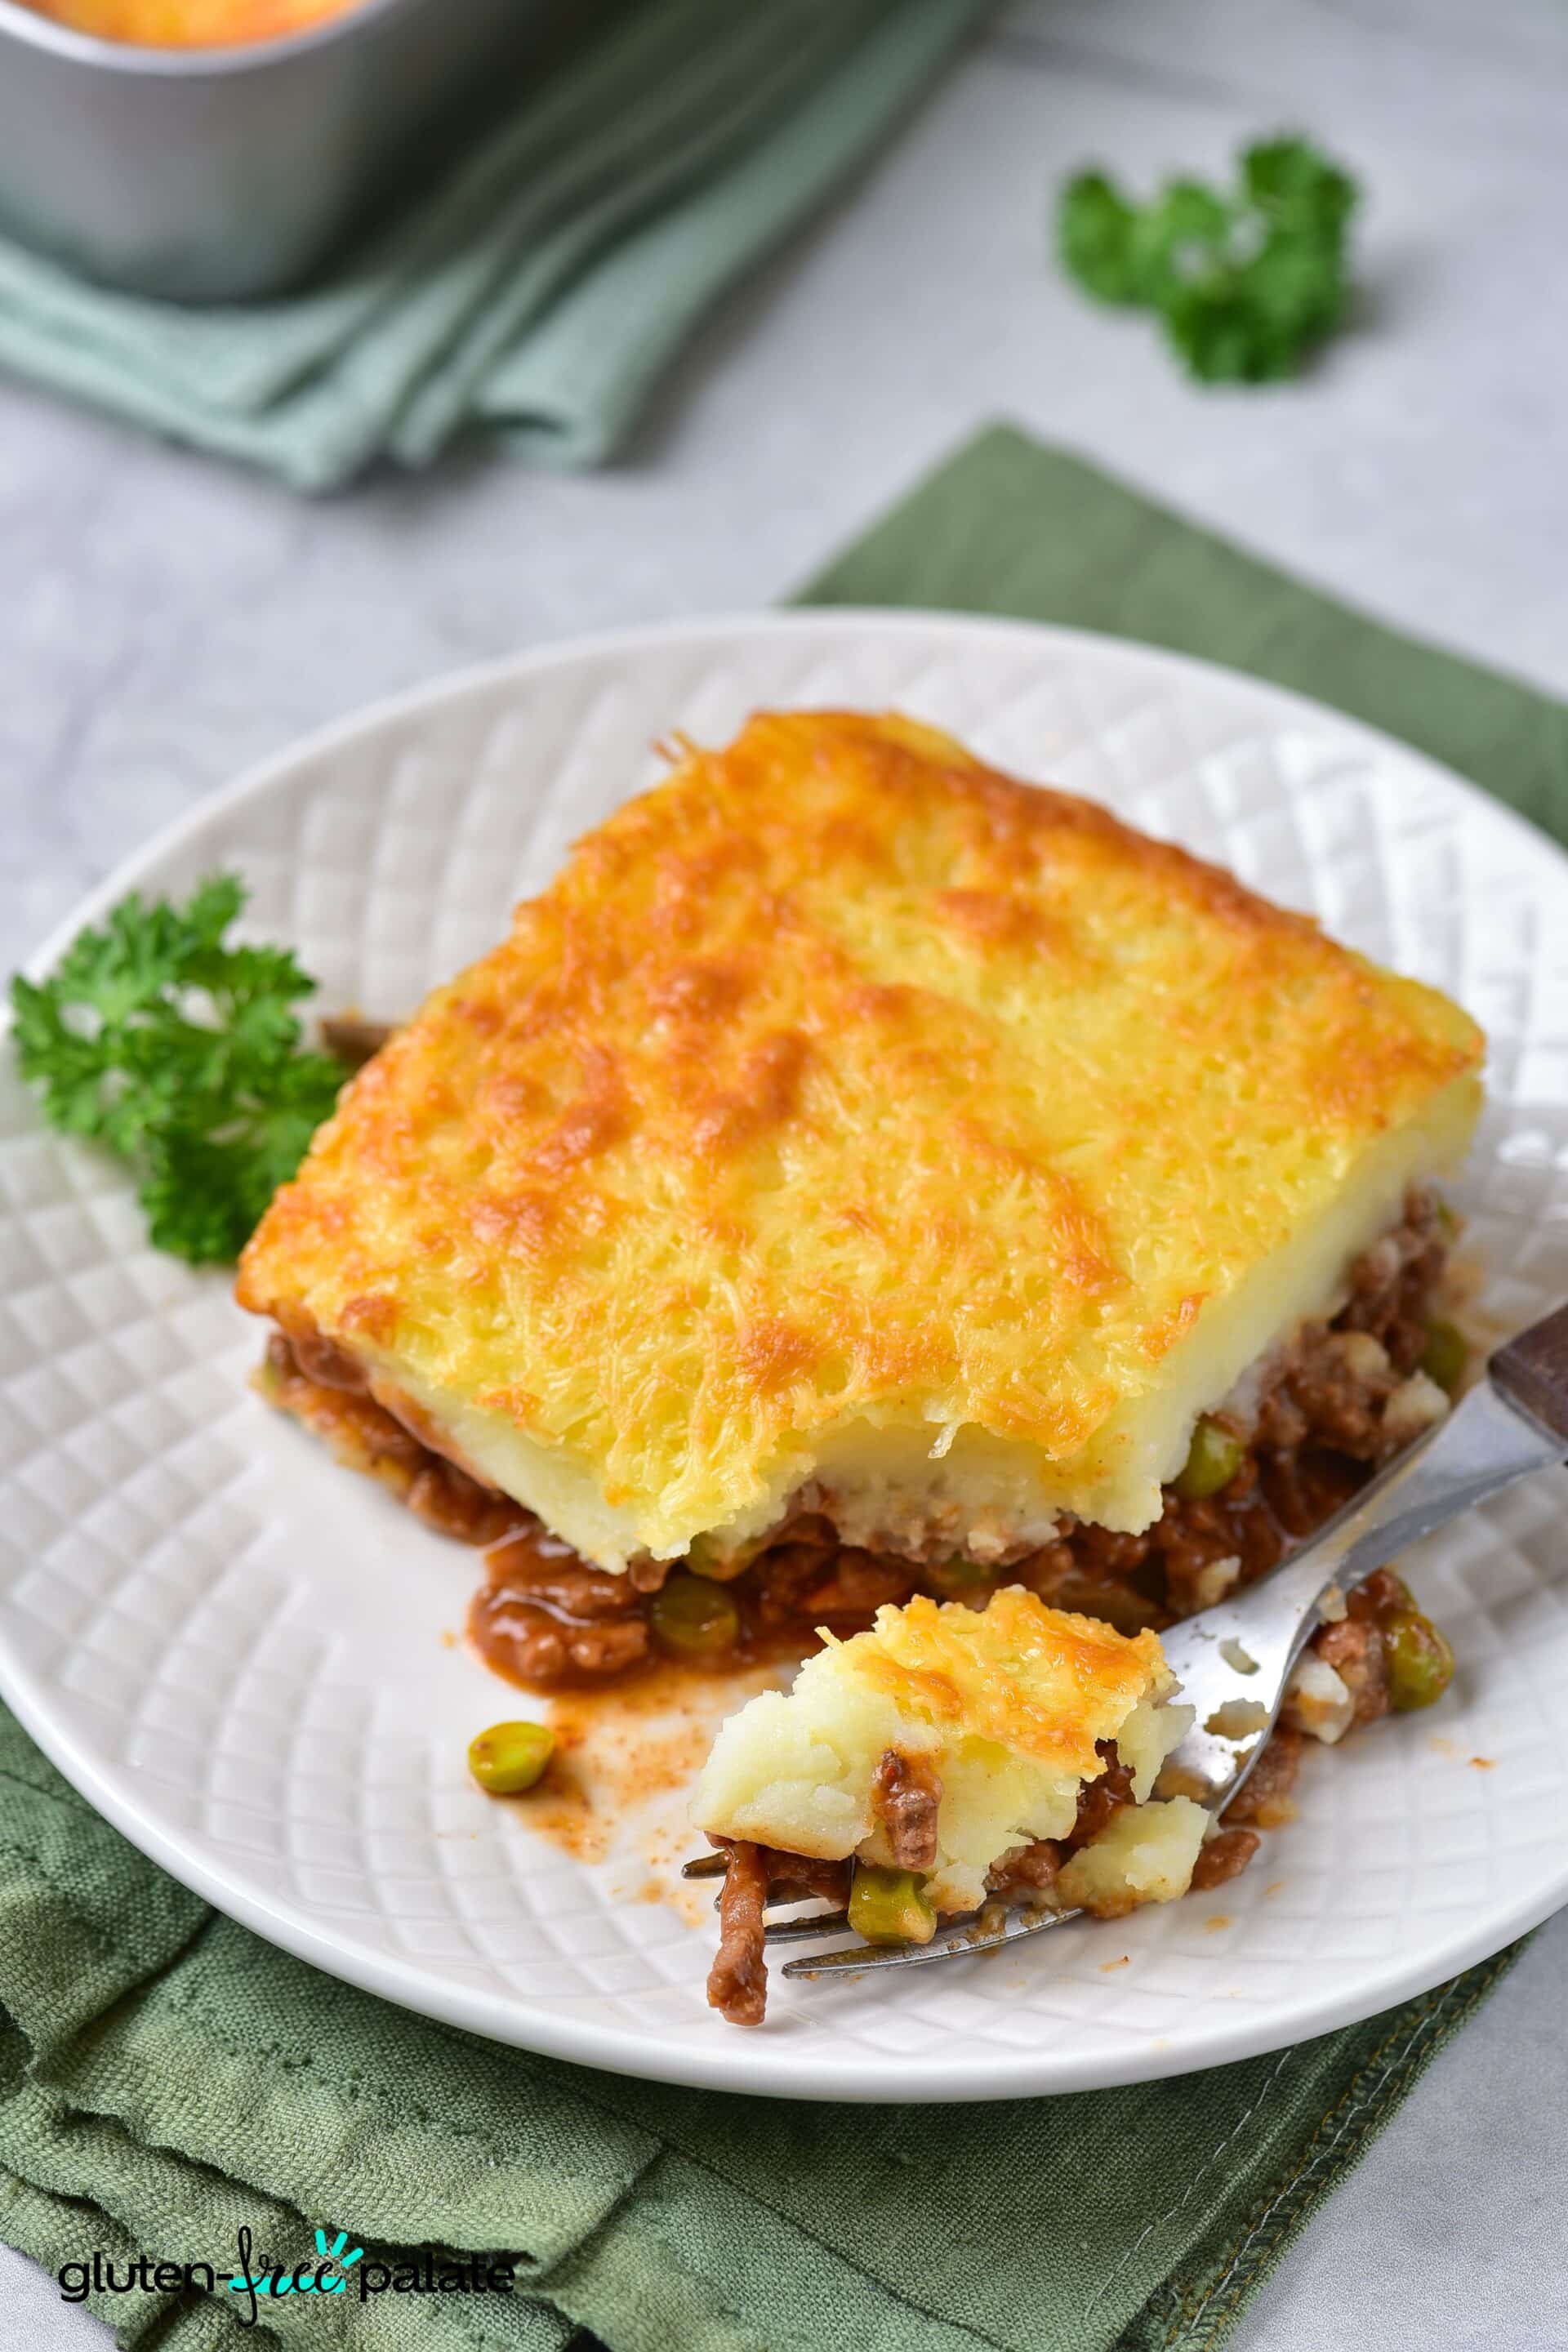 A slice of gluten-free shepherds pie on a white plate with a fork